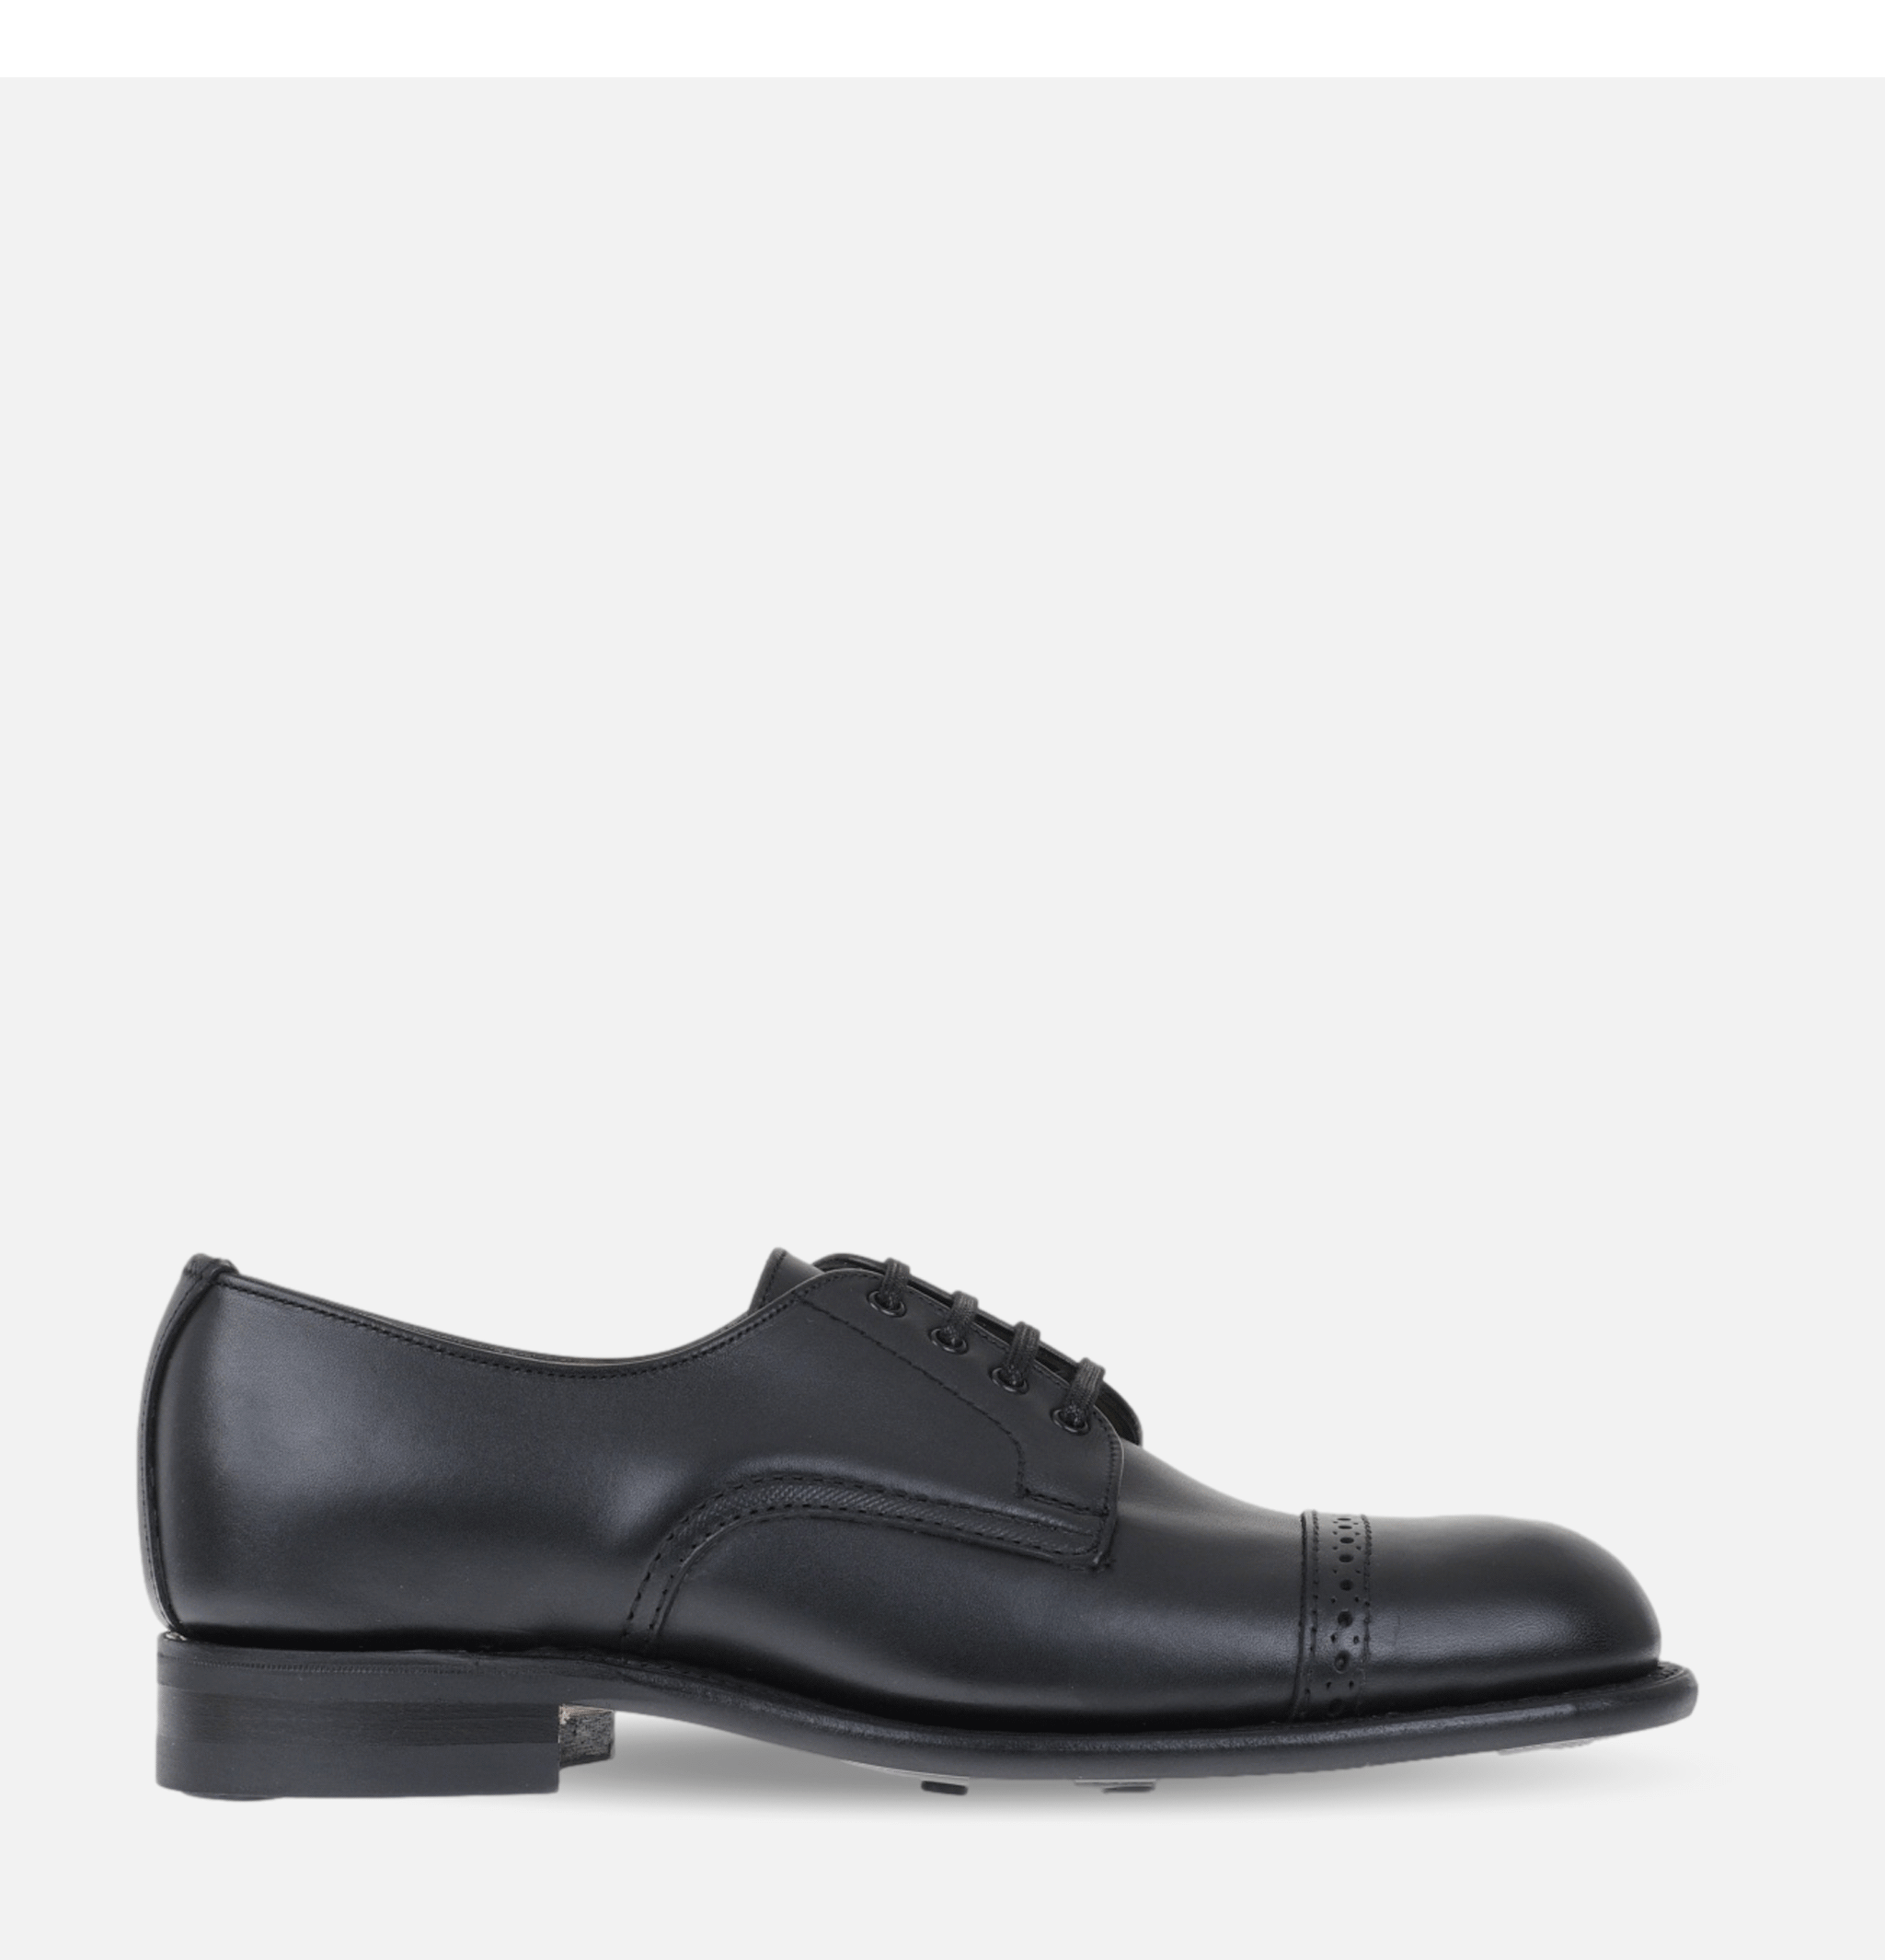 B.G.S Punched Cap Derby Shoes